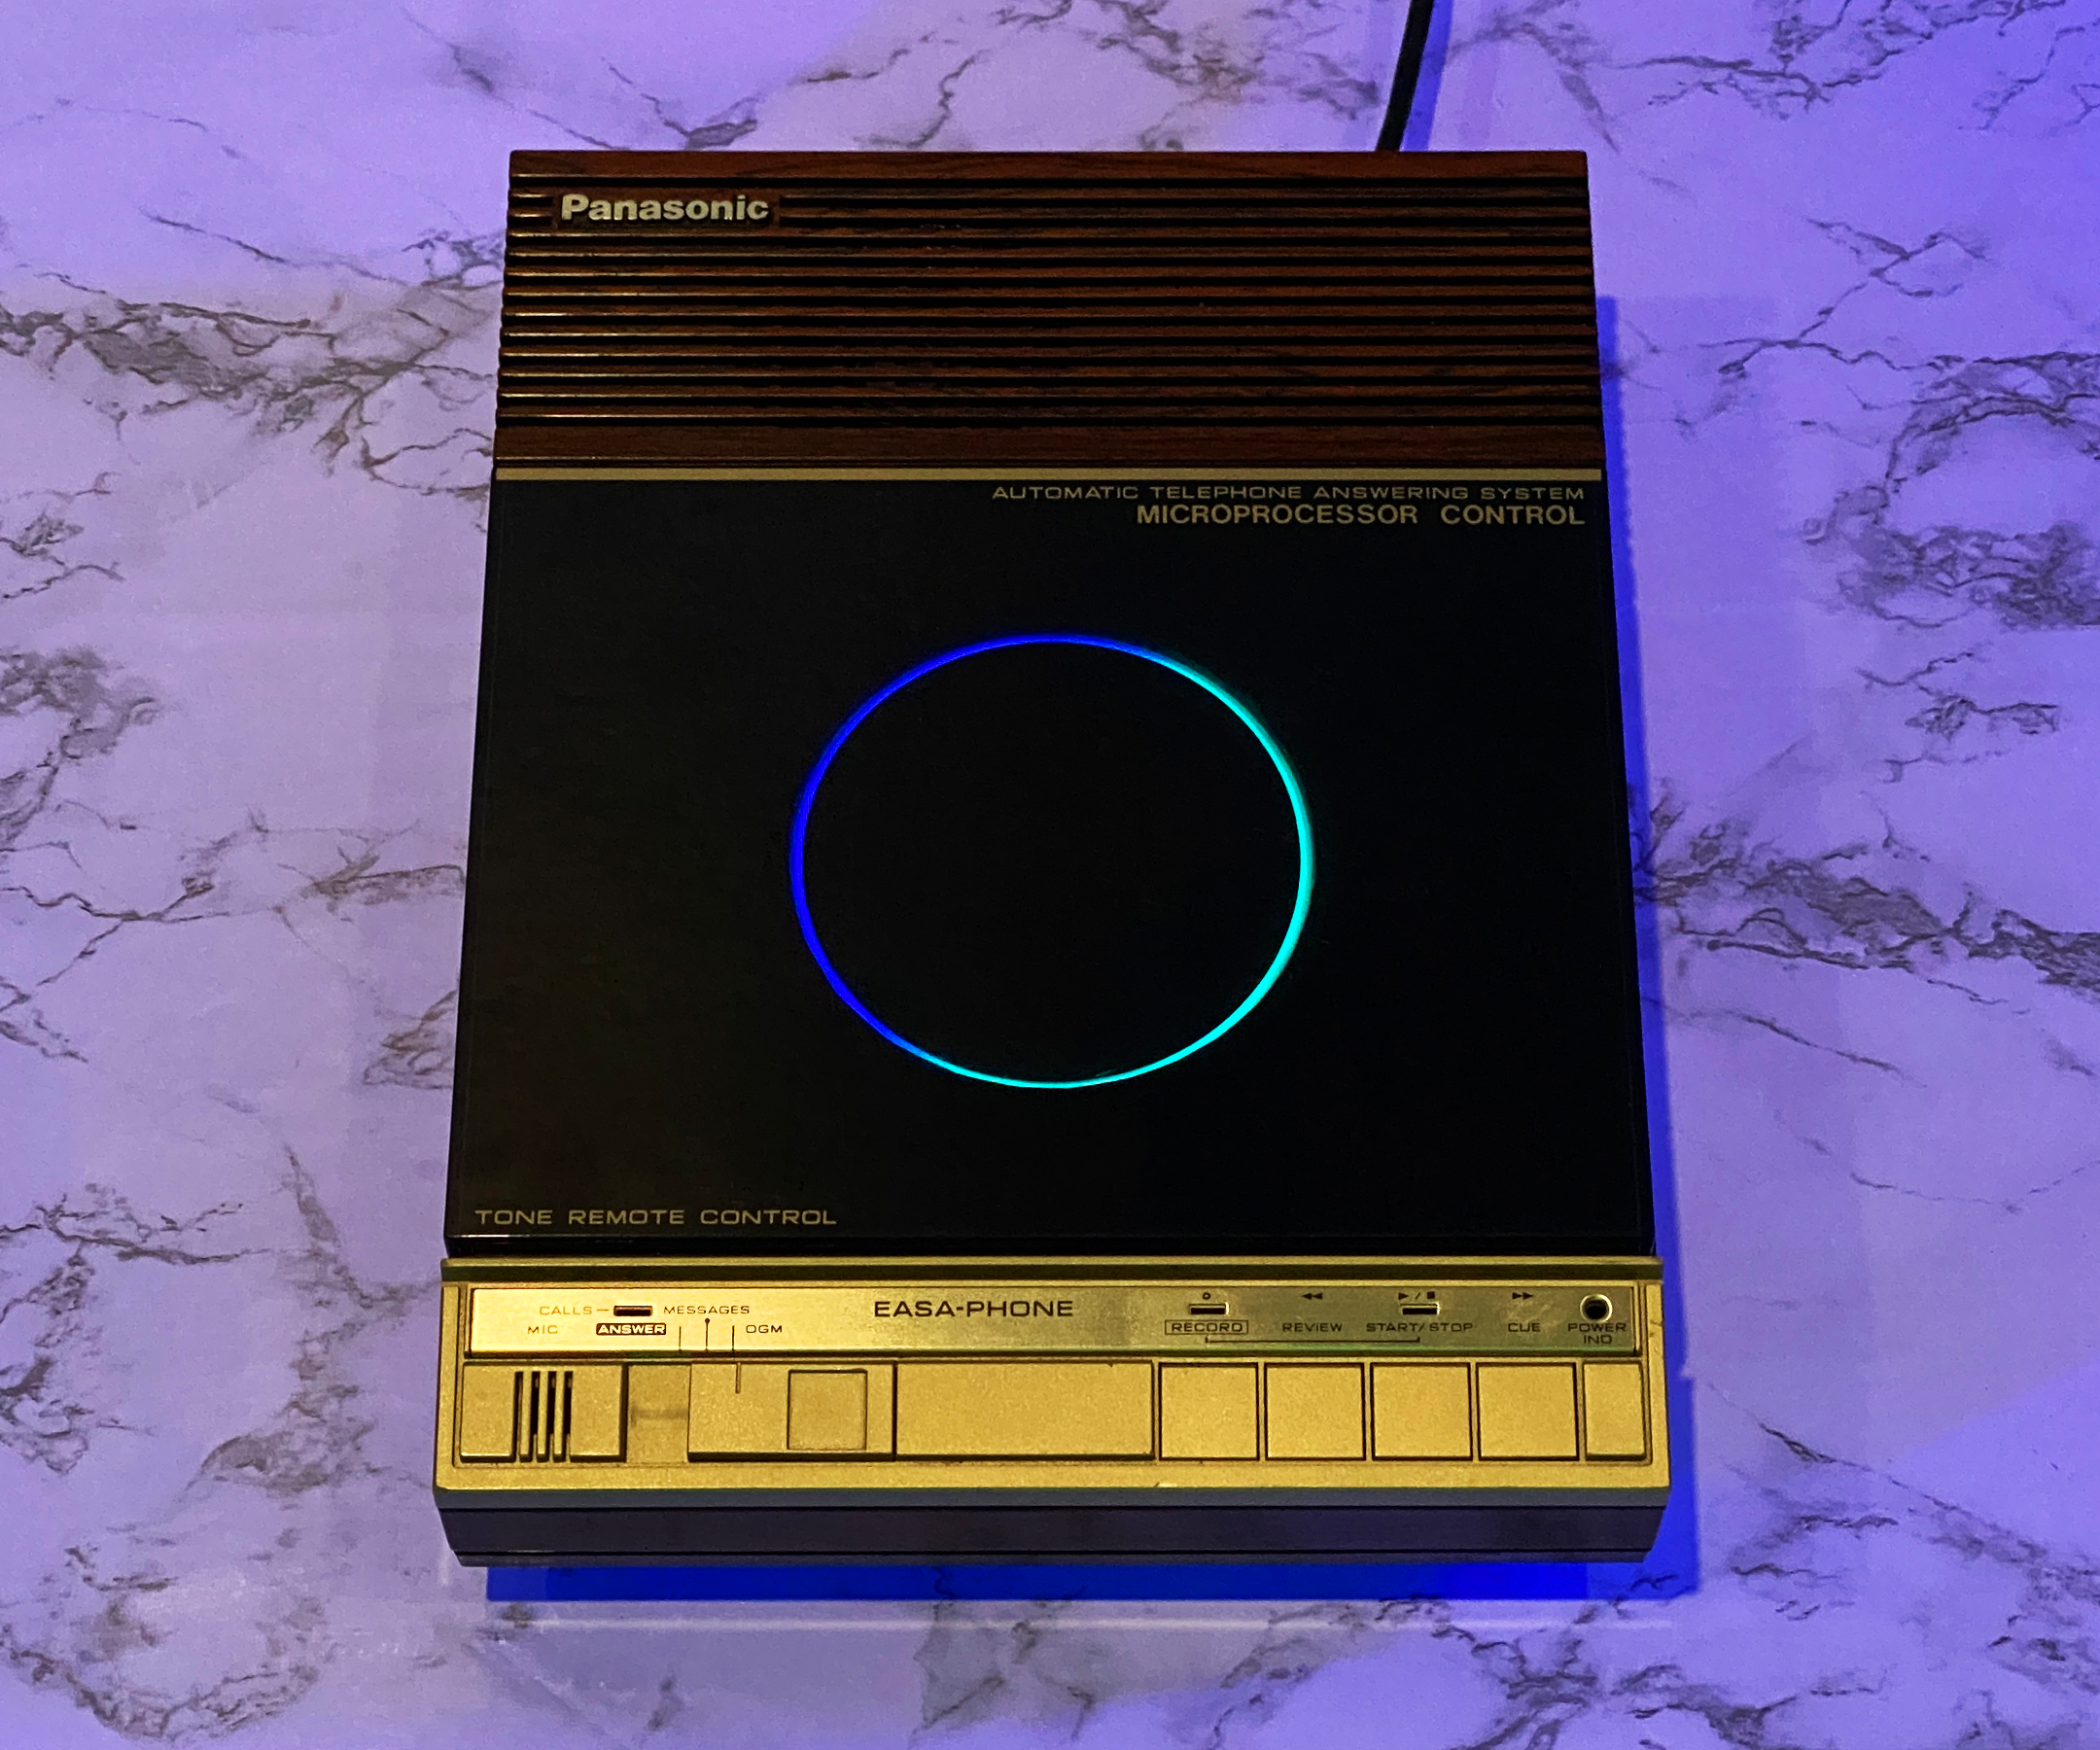 How I Brought an Amazon Echo Dot Into the 1980s, a Collection of Good Practices in Repurposing Obsolete Technology